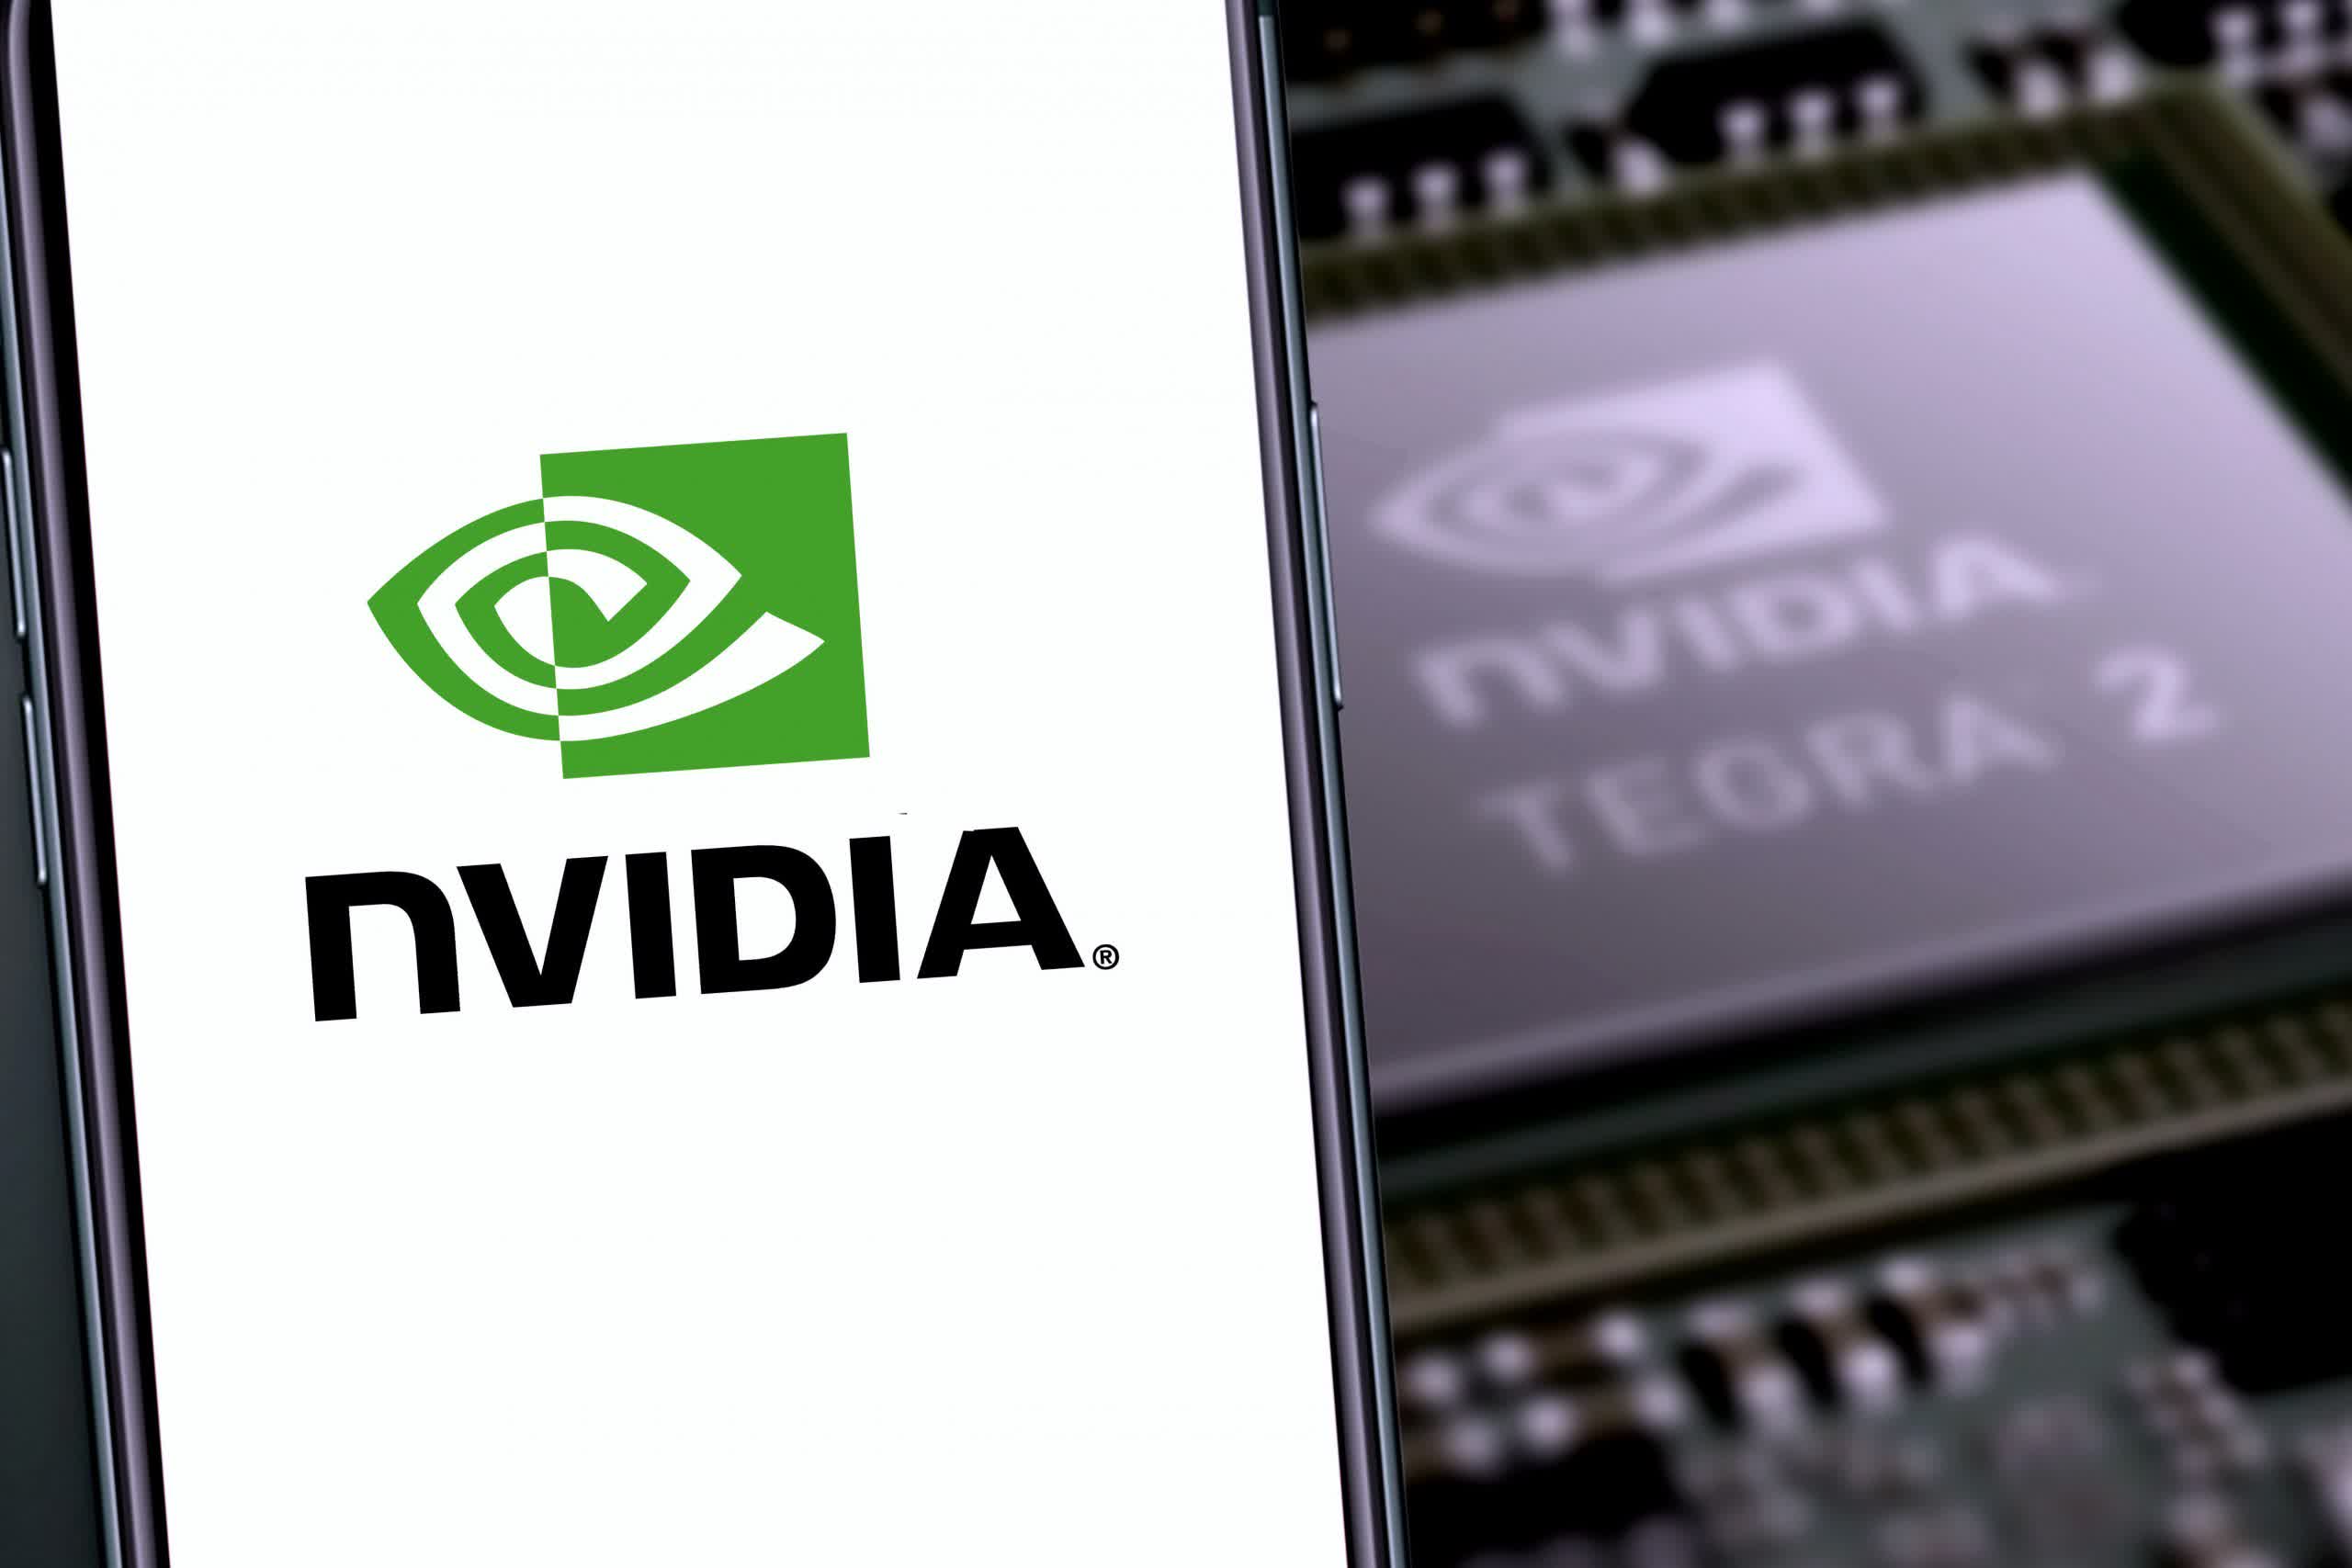 SoftBank reportedly closing a $40 billion sale of ARM to Nvidia – now confirmed